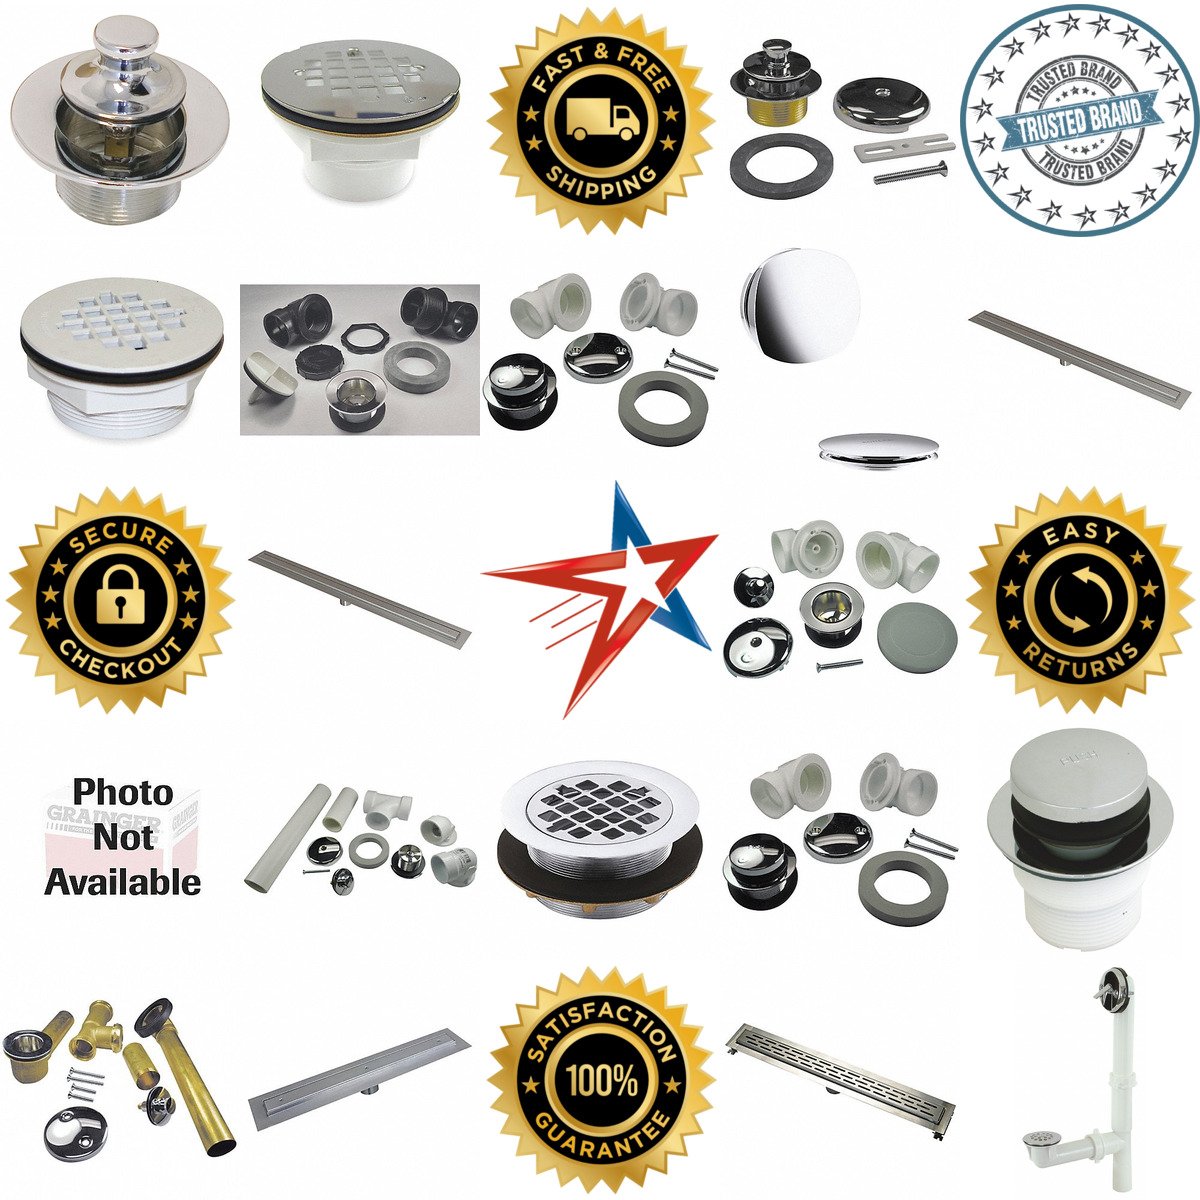 A selection of Shower Drains products on GoVets